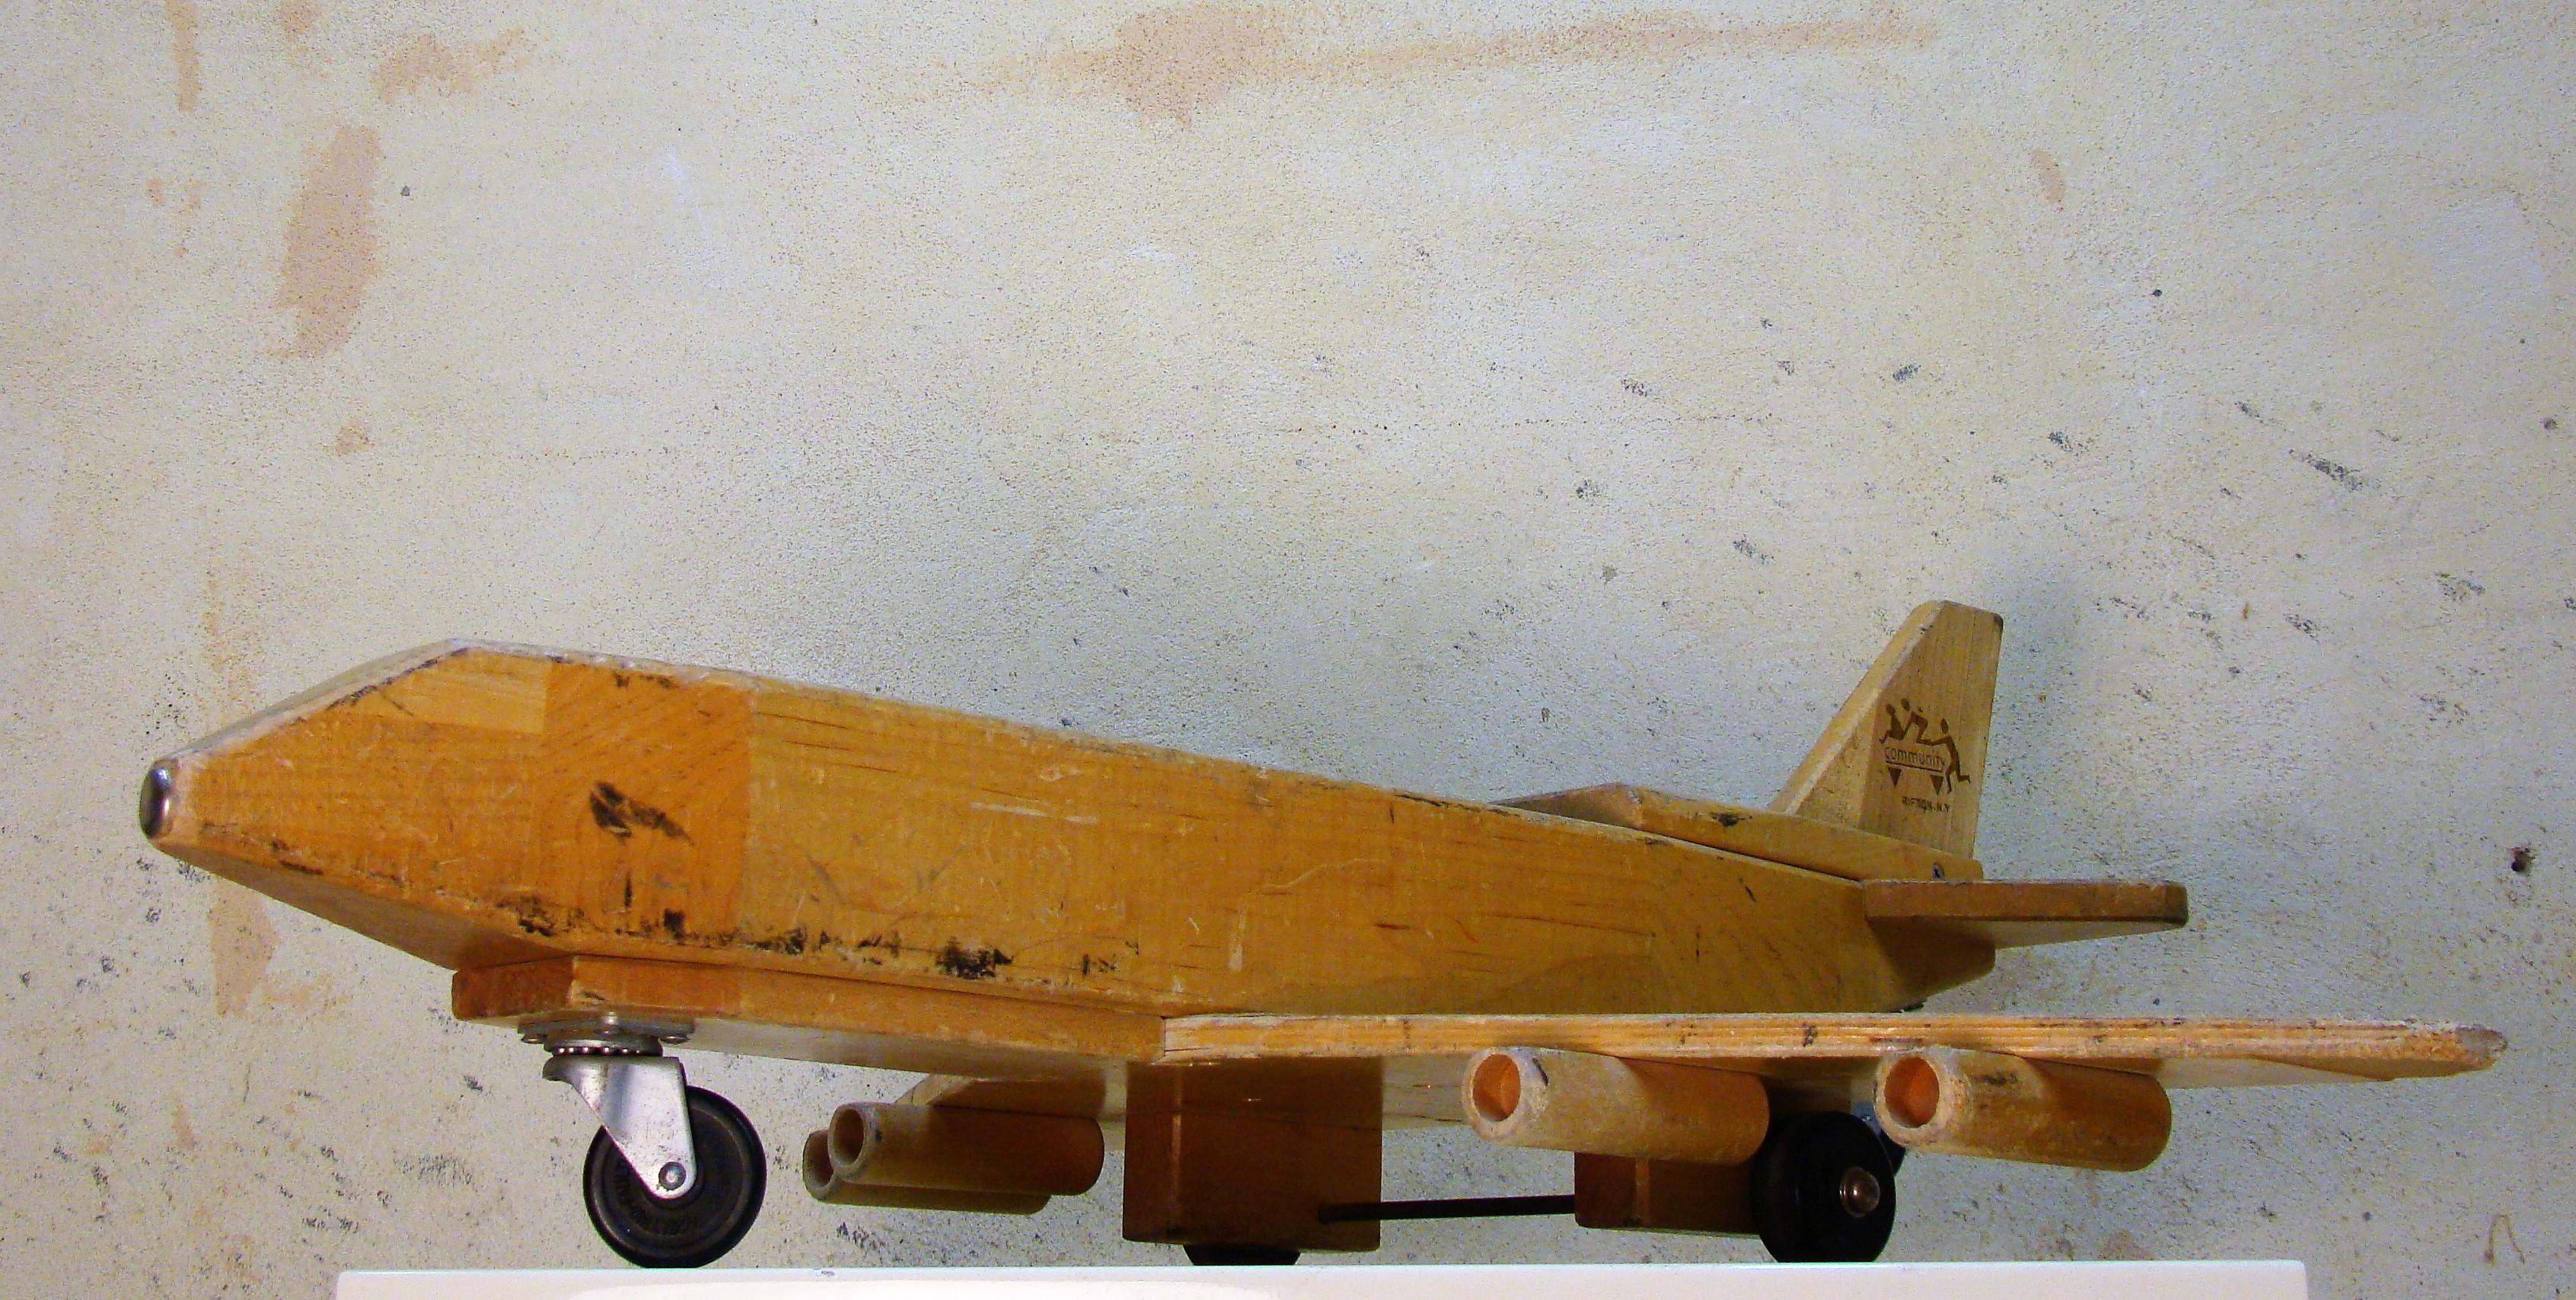 Community Playthings Wooden Toy Cargo Airplane, circa 1968, USA For Sale 5